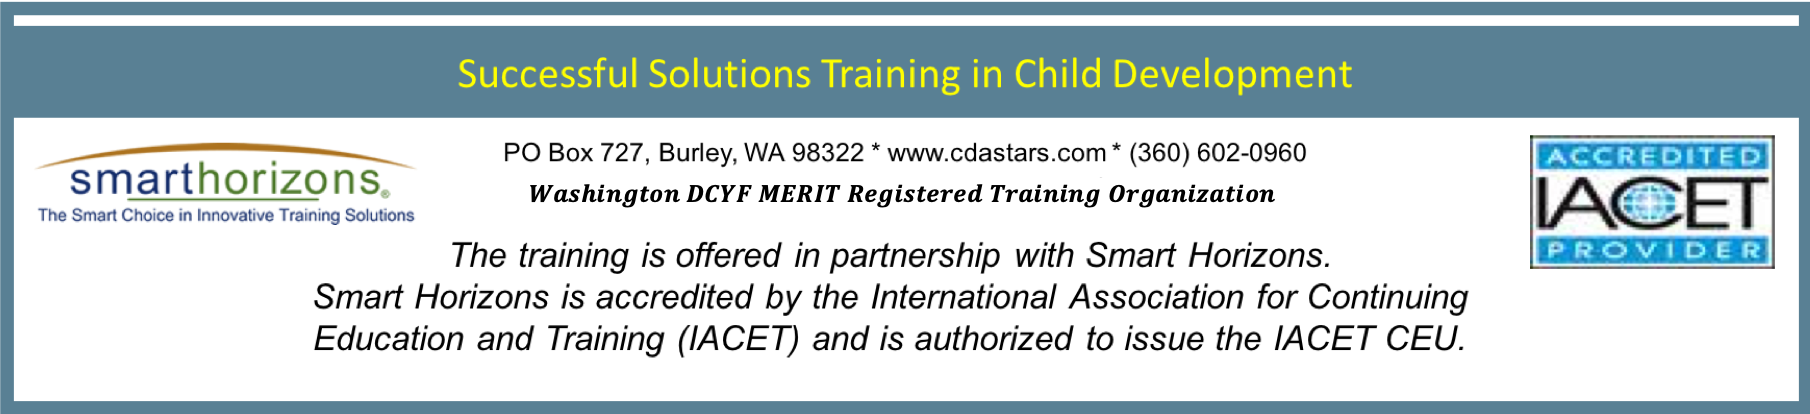 Child Care Training Courses for Administrators and Teachers